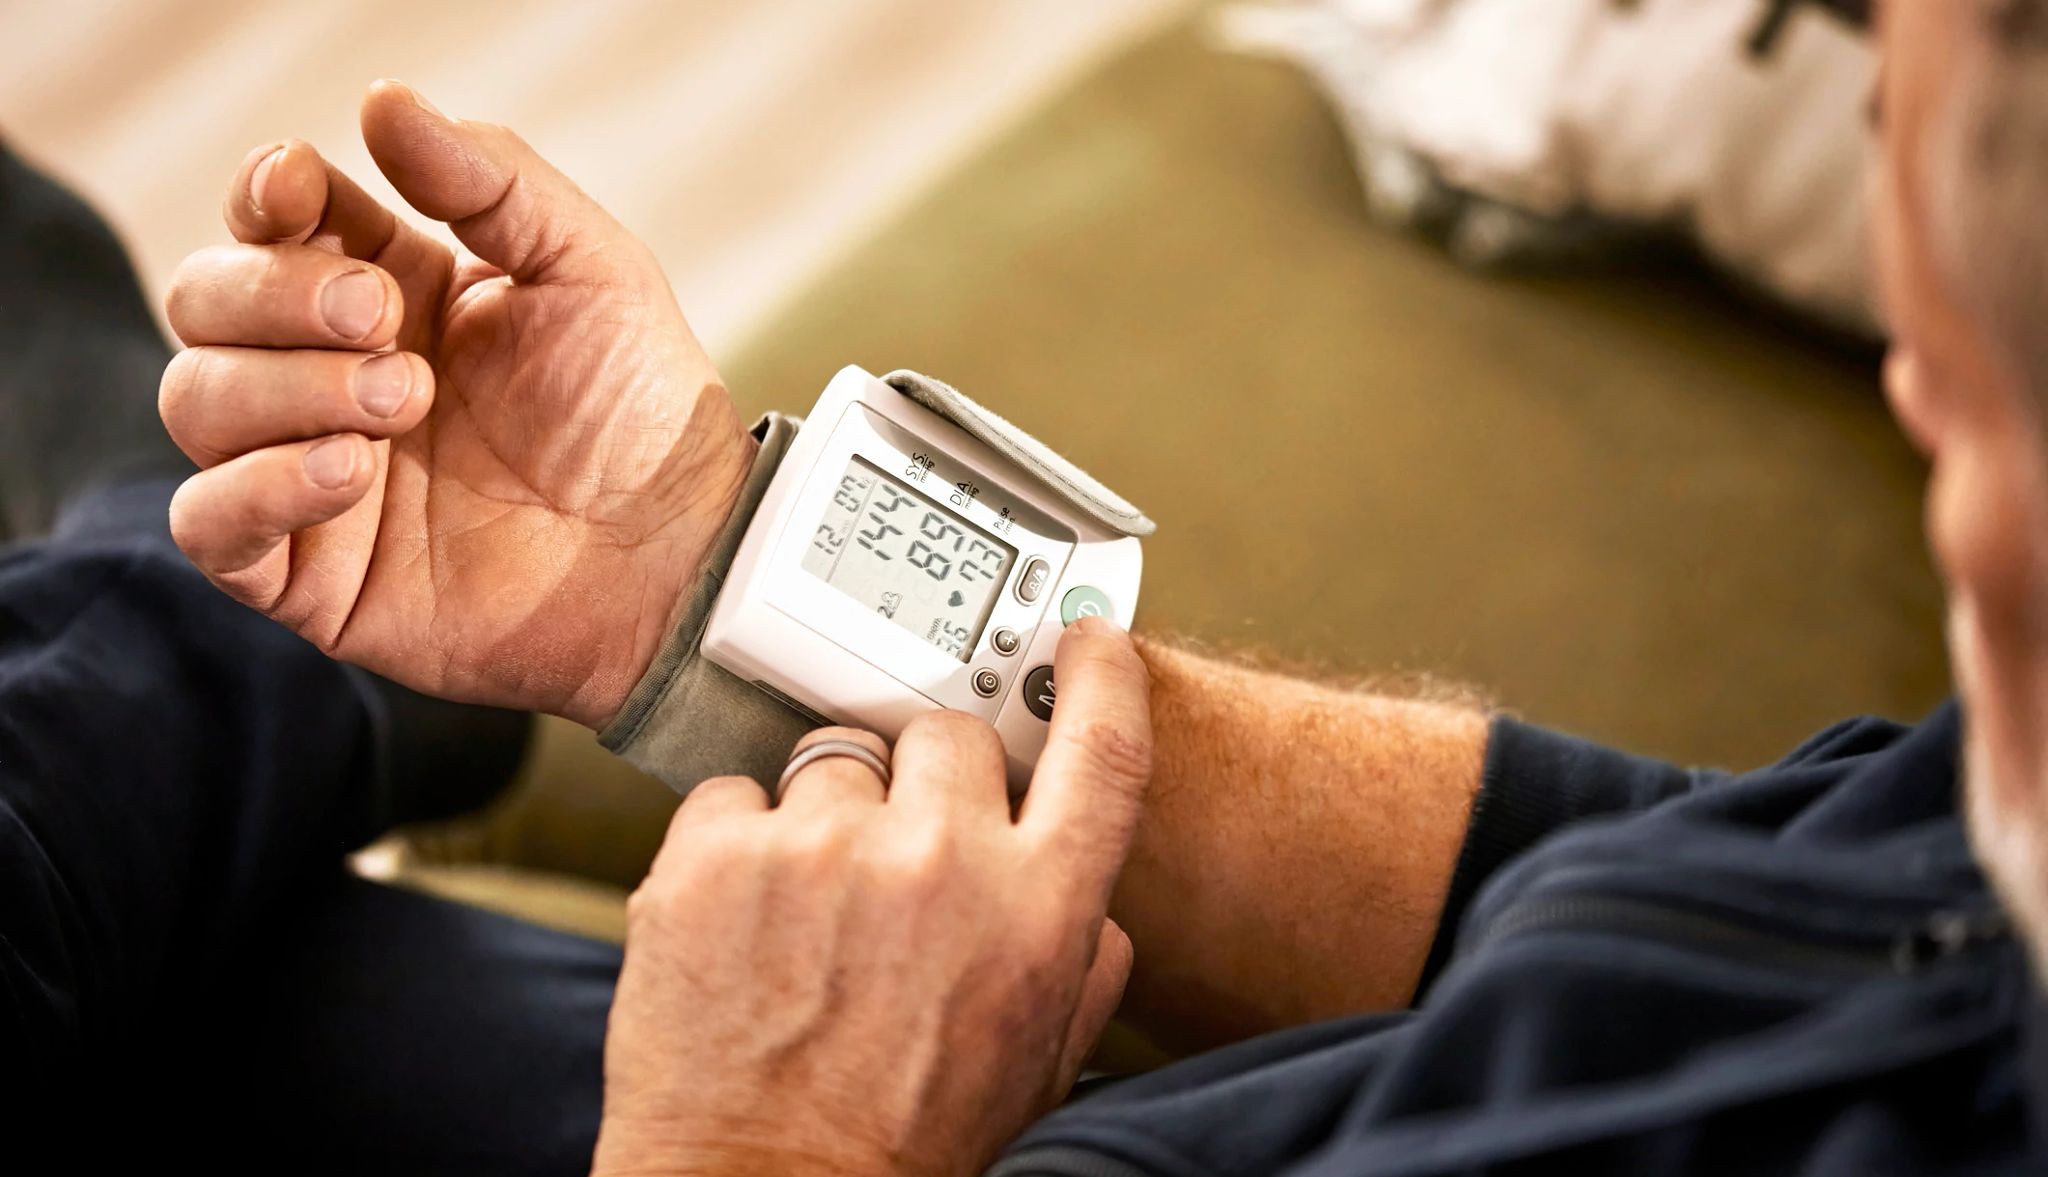 man checking his blood pressure with a wrist monitor